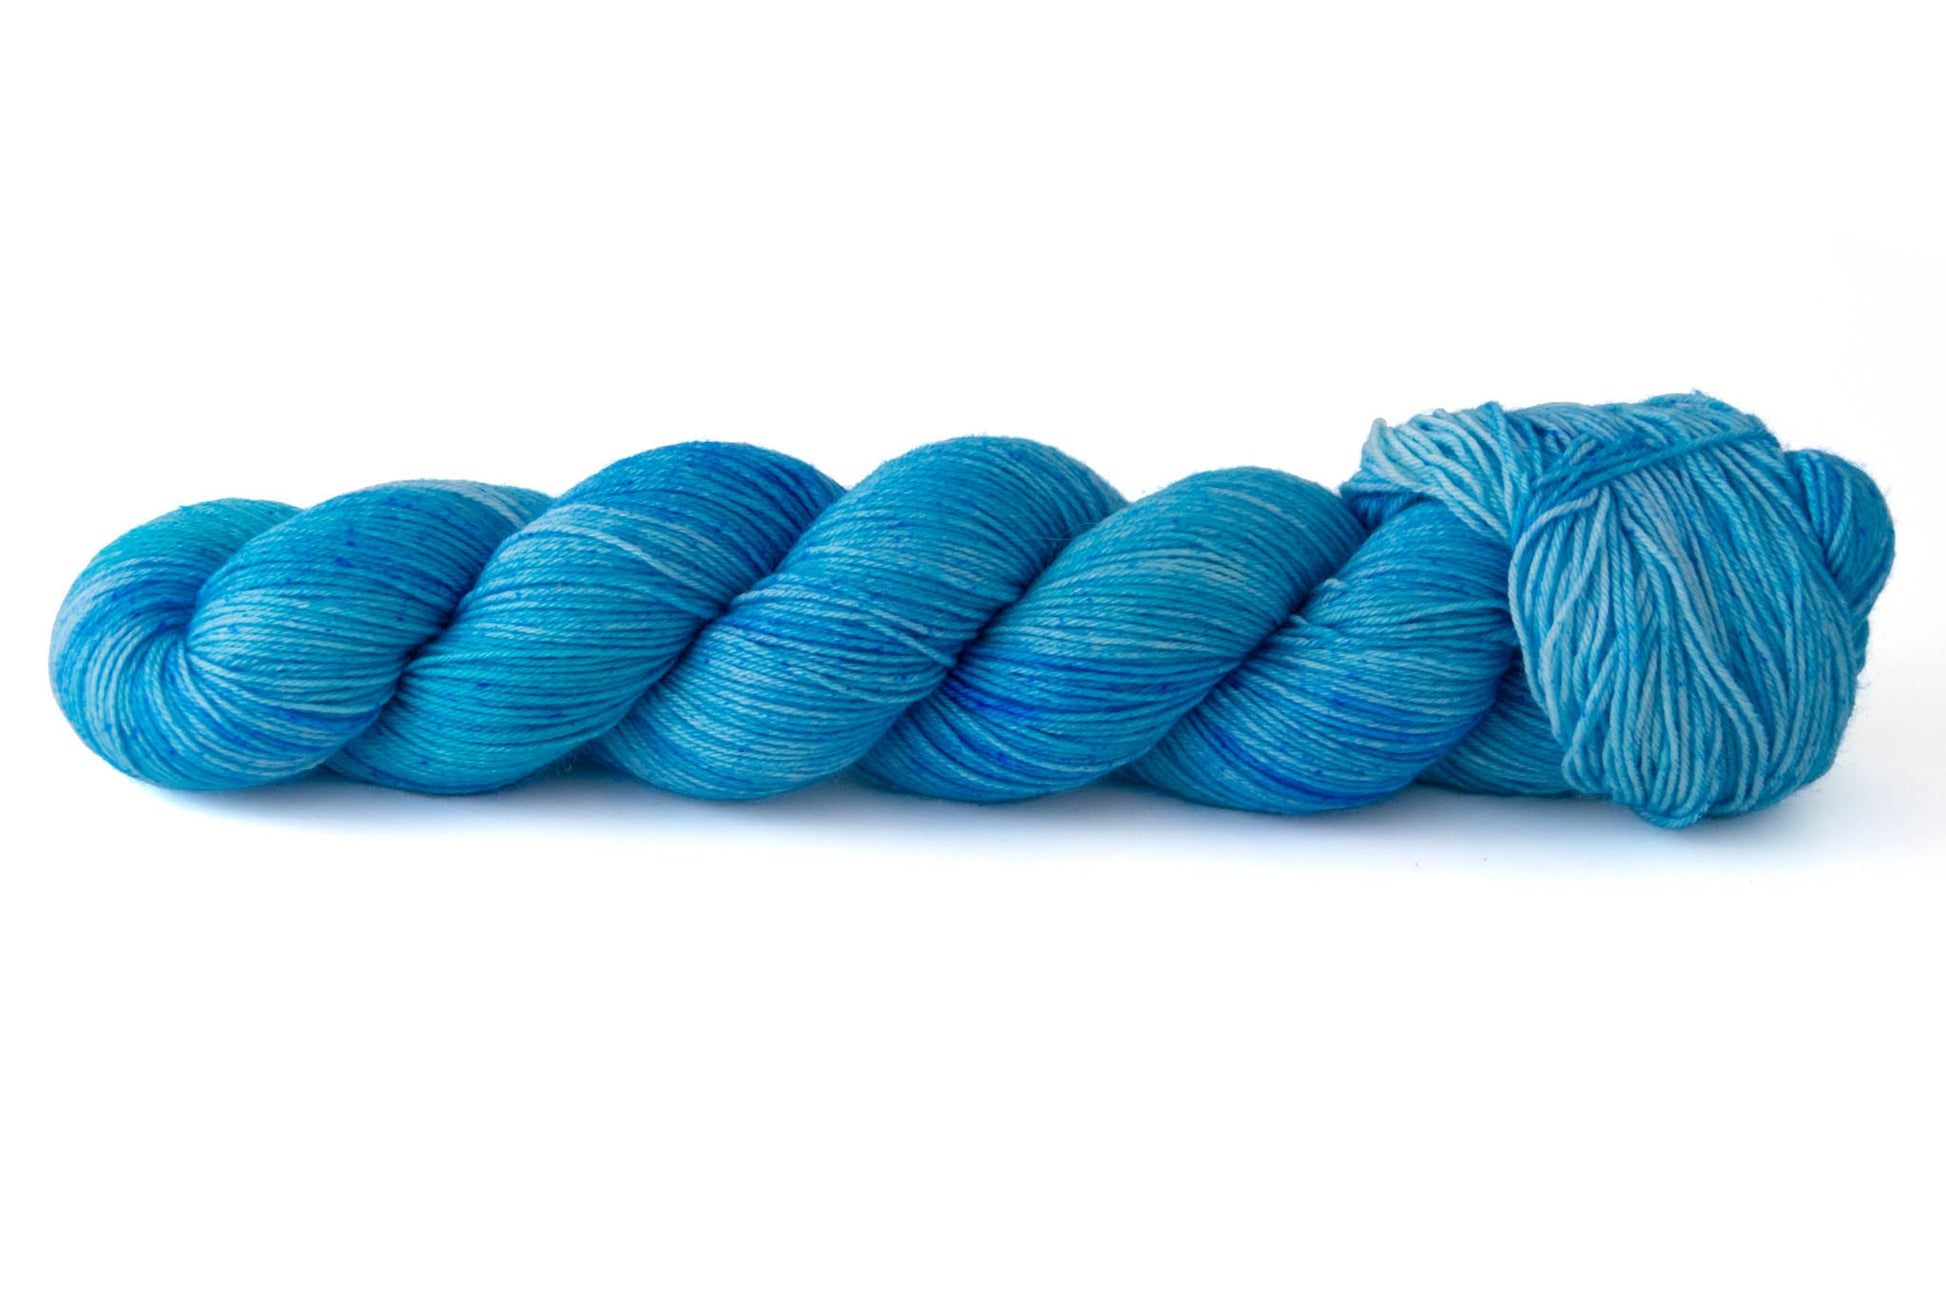 A skein of highly tonal hand-dyed blue yarn ranging from indigo to aqua.